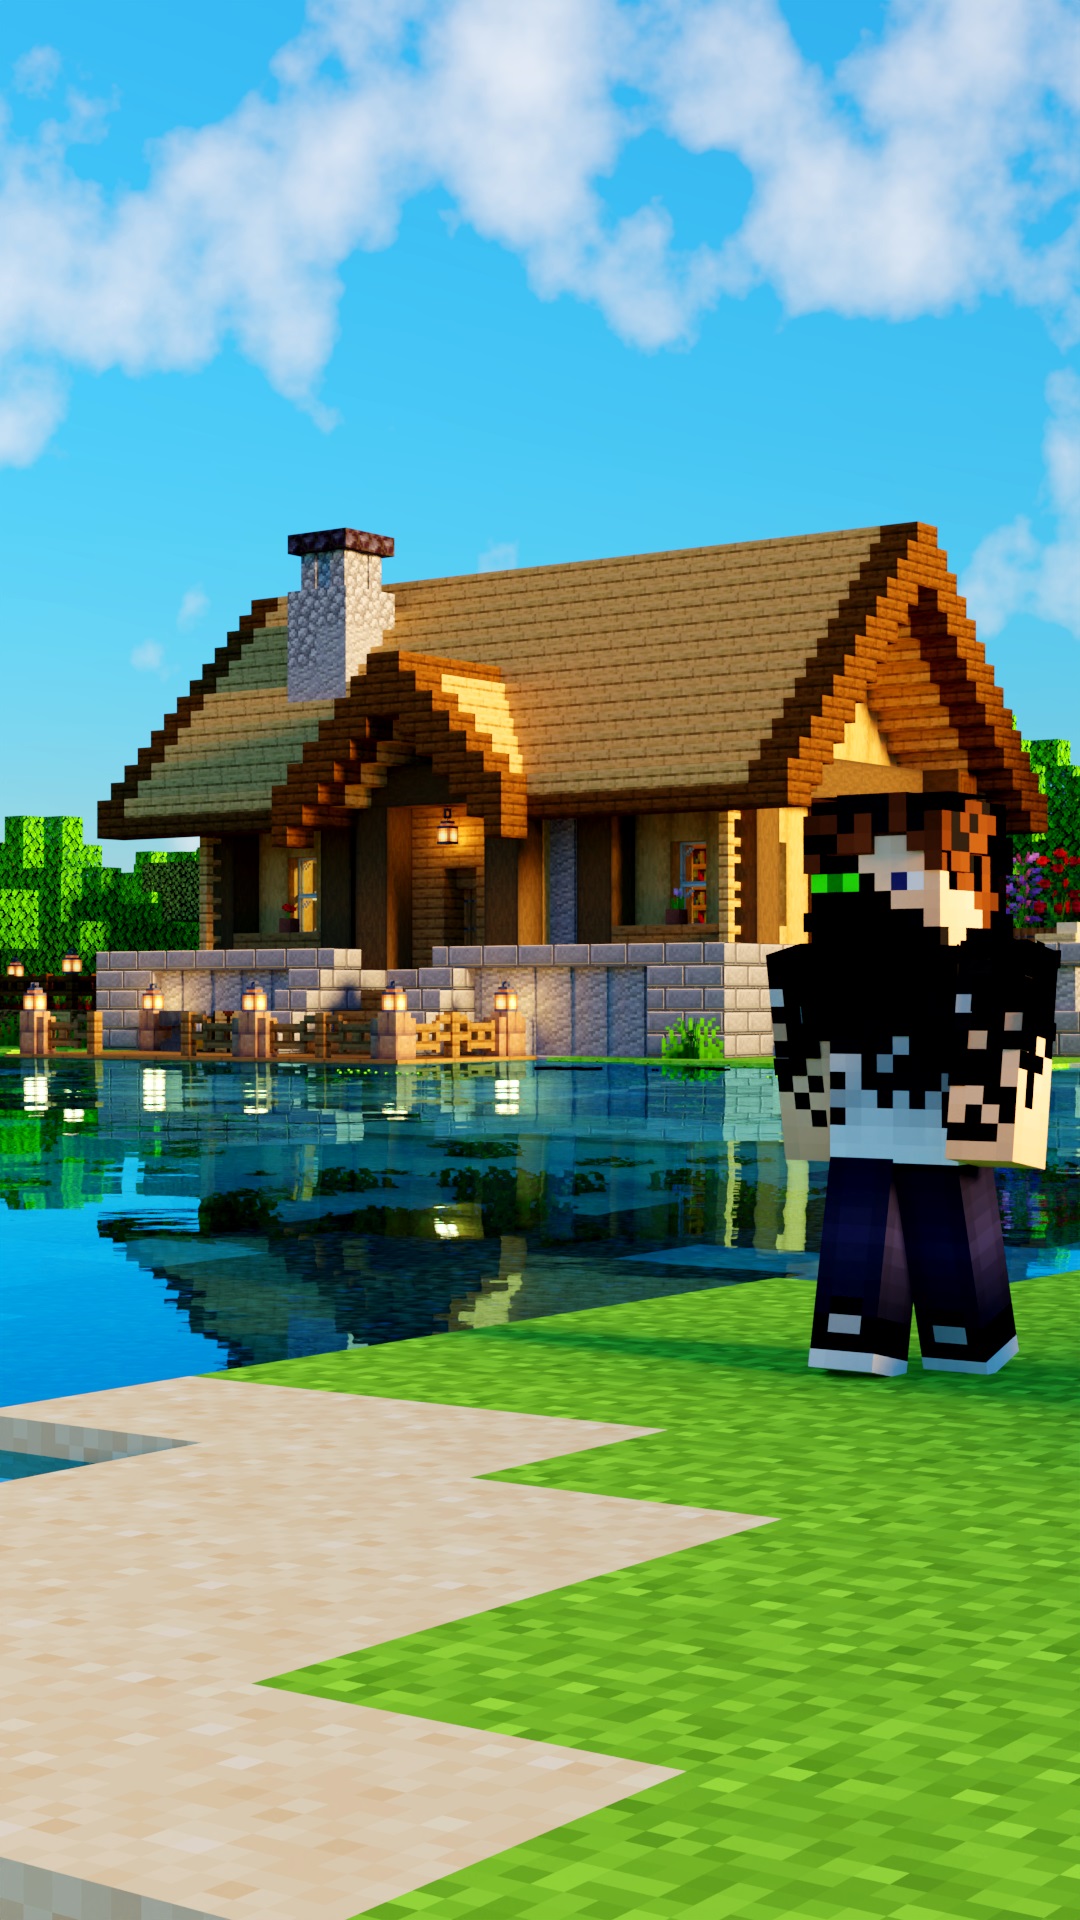 Minecraft figure standing on a grassy path next to water and a house